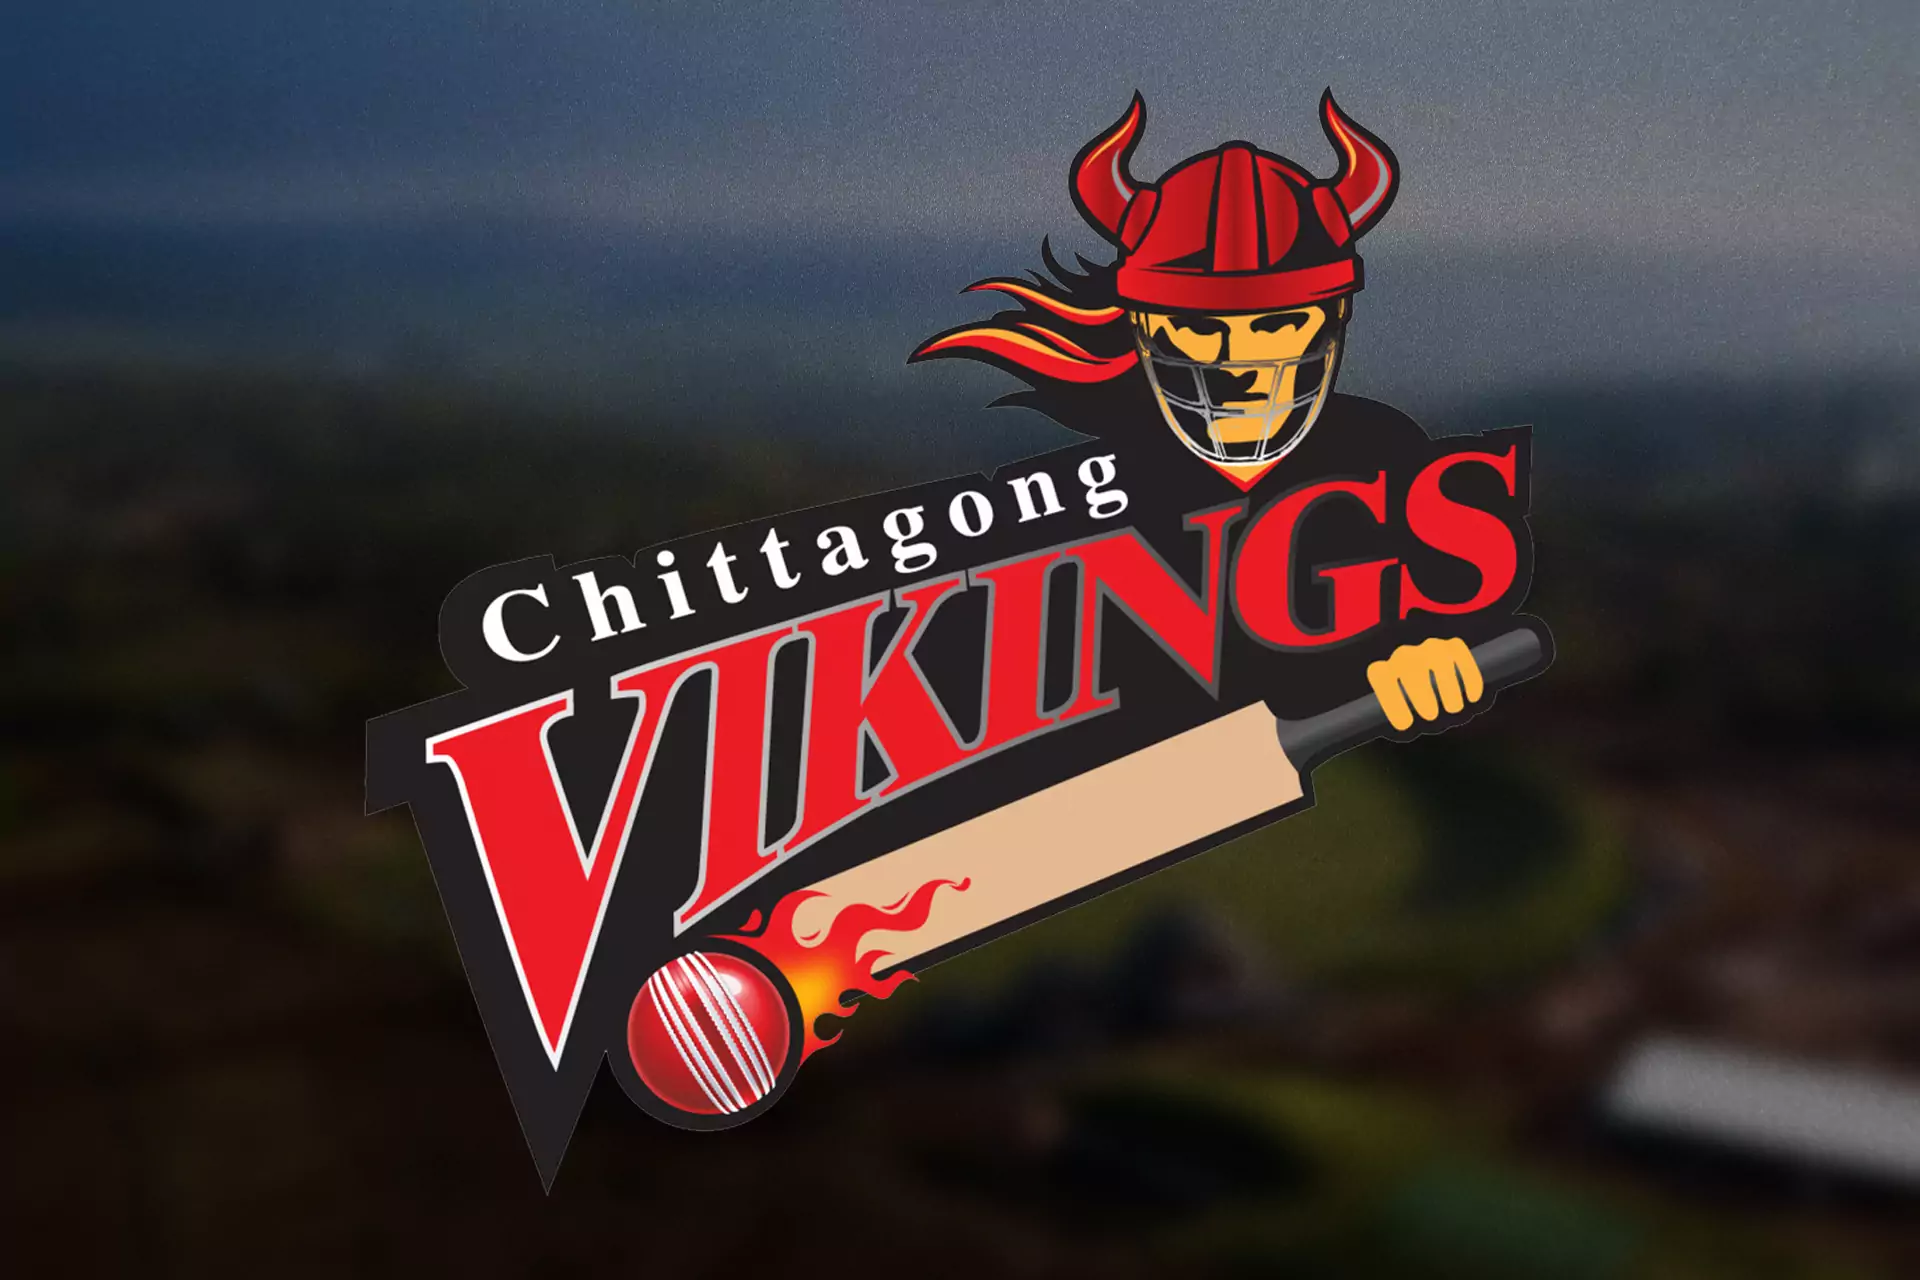 The Chittagong Vikings team as many others was founded in 2012.